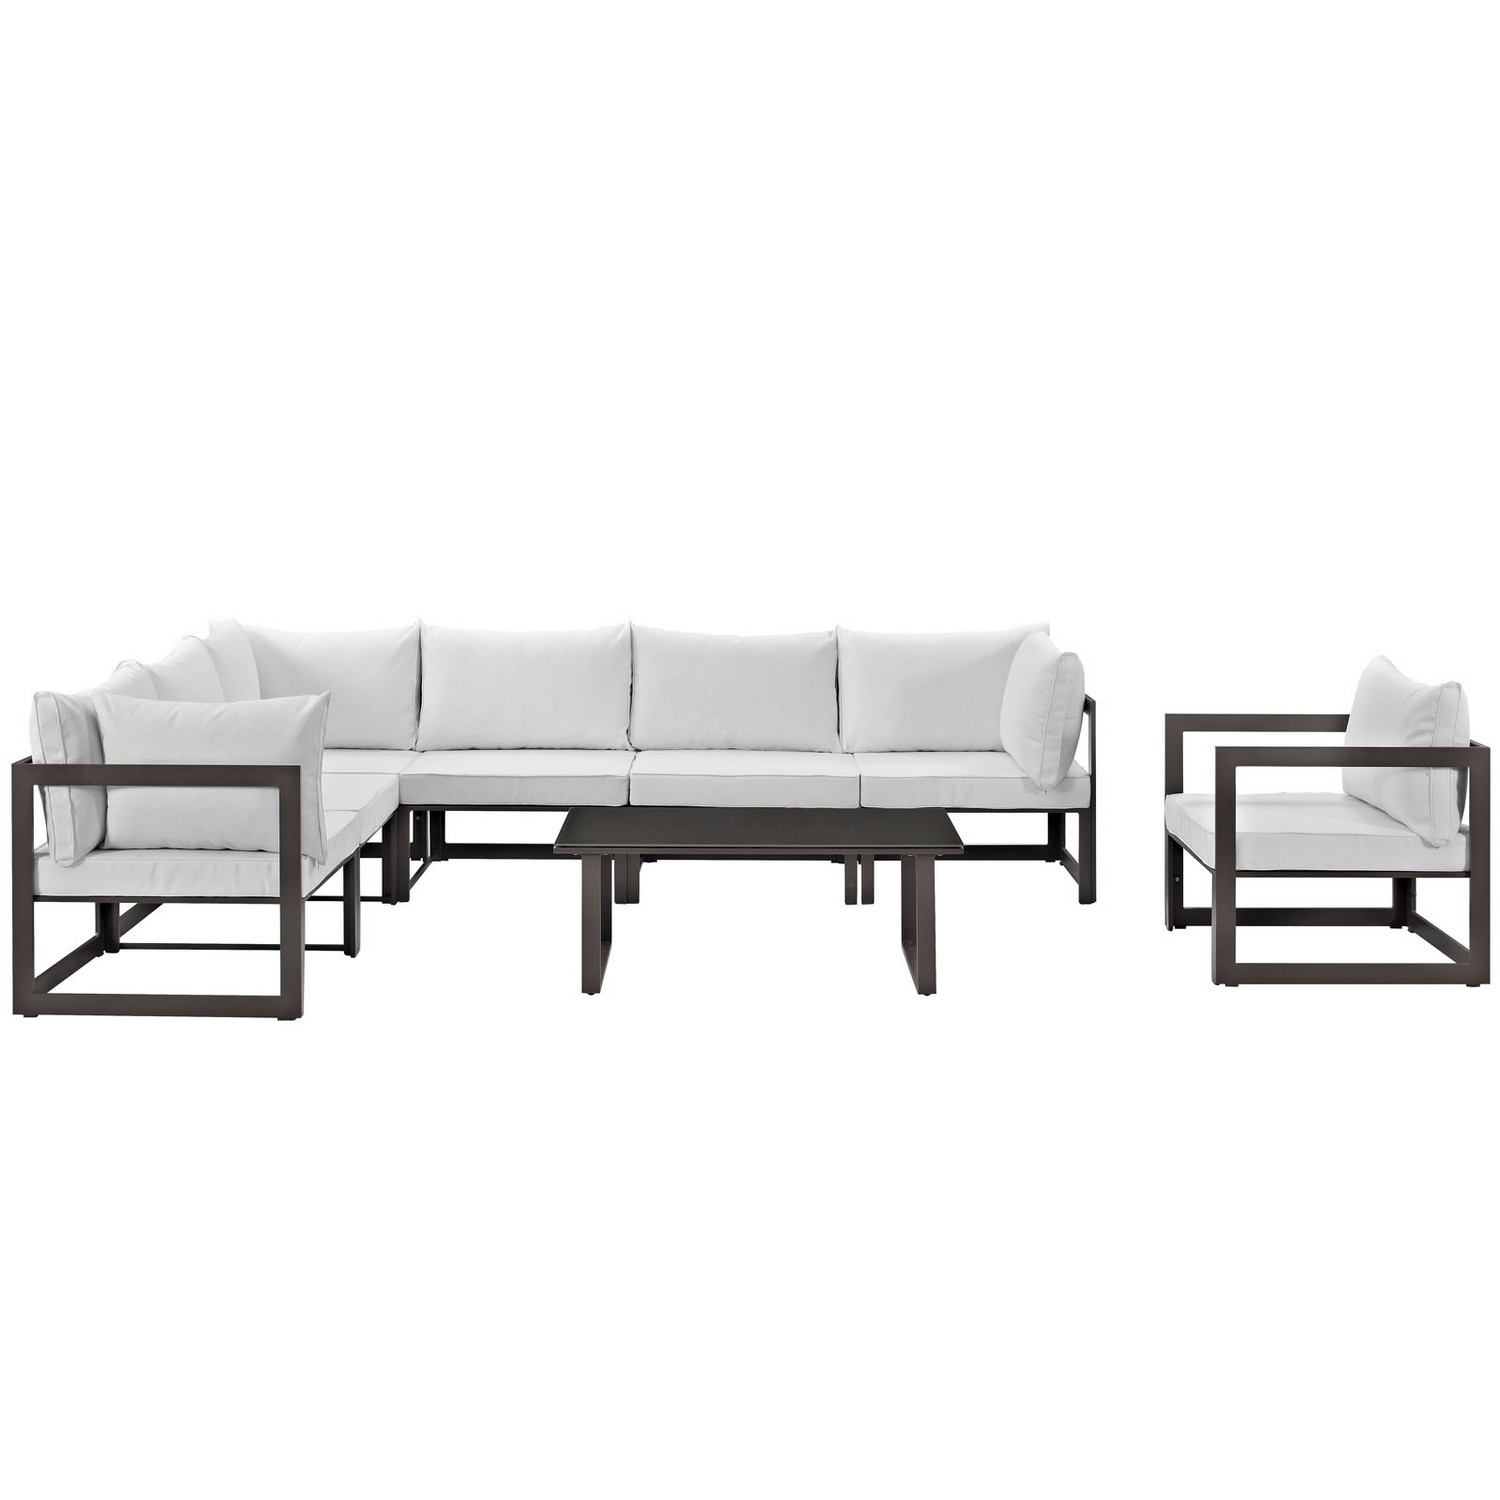 Modway Fortuna 8 Piece Outdoor Patio Sectional Sofa Set - Brown/White